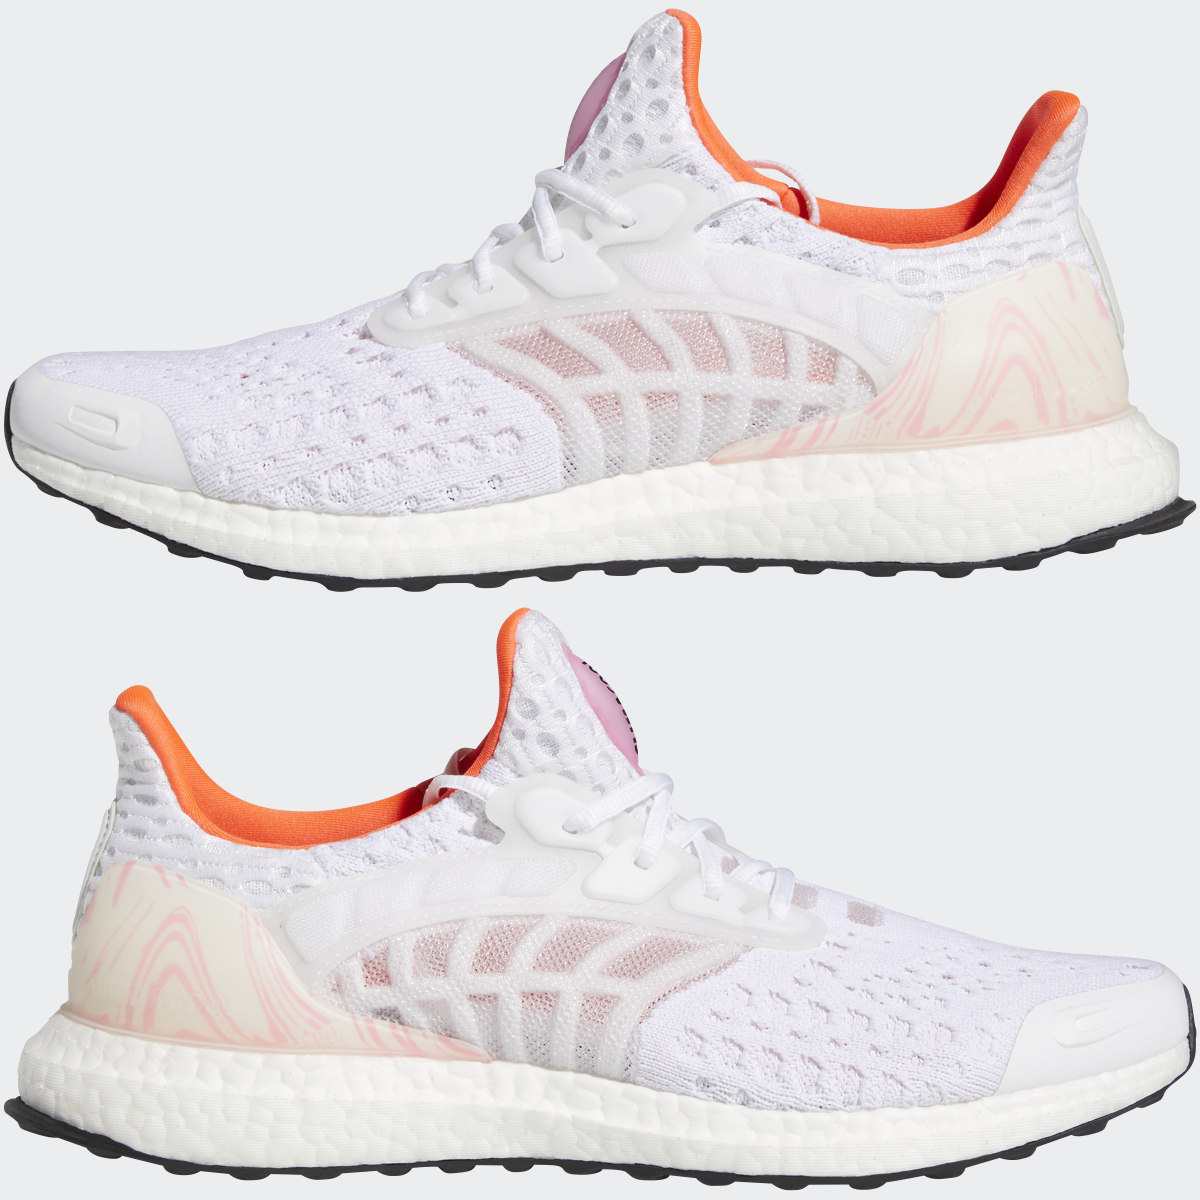 Adidas Ultraboost CC_2 DNA Climacool Running Sportswear Lifestyle Shoes. 11